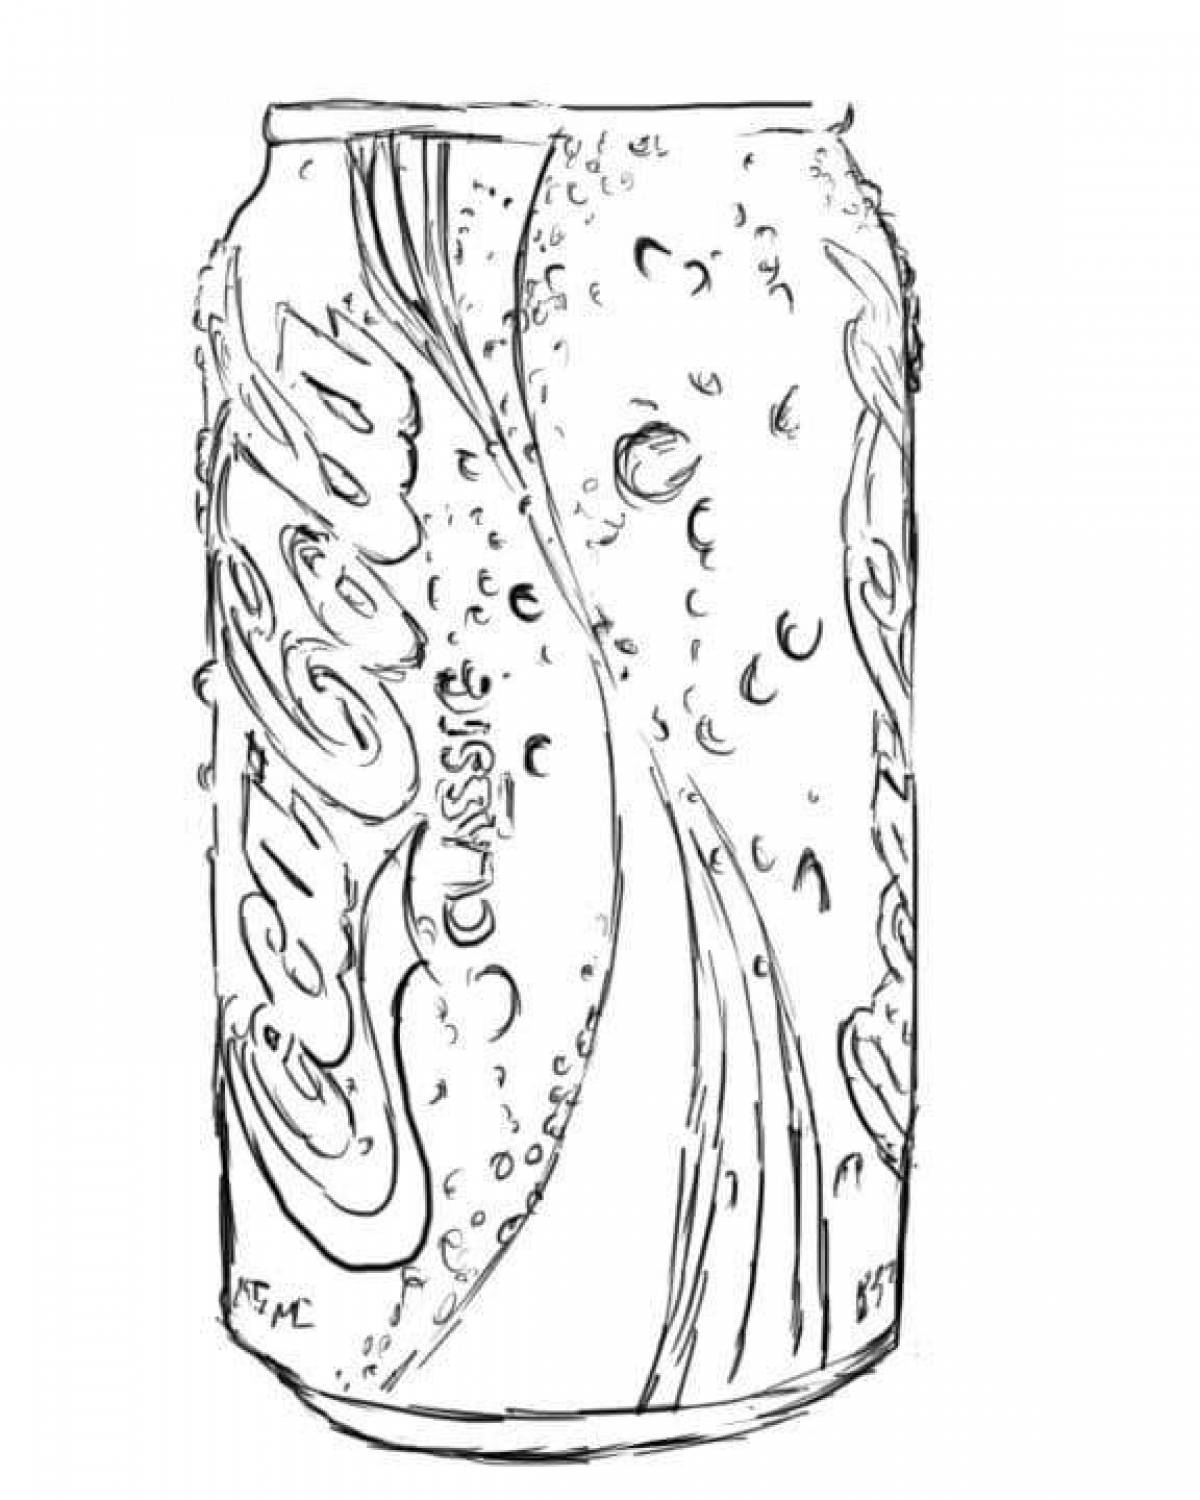 Colorful cola coloring page